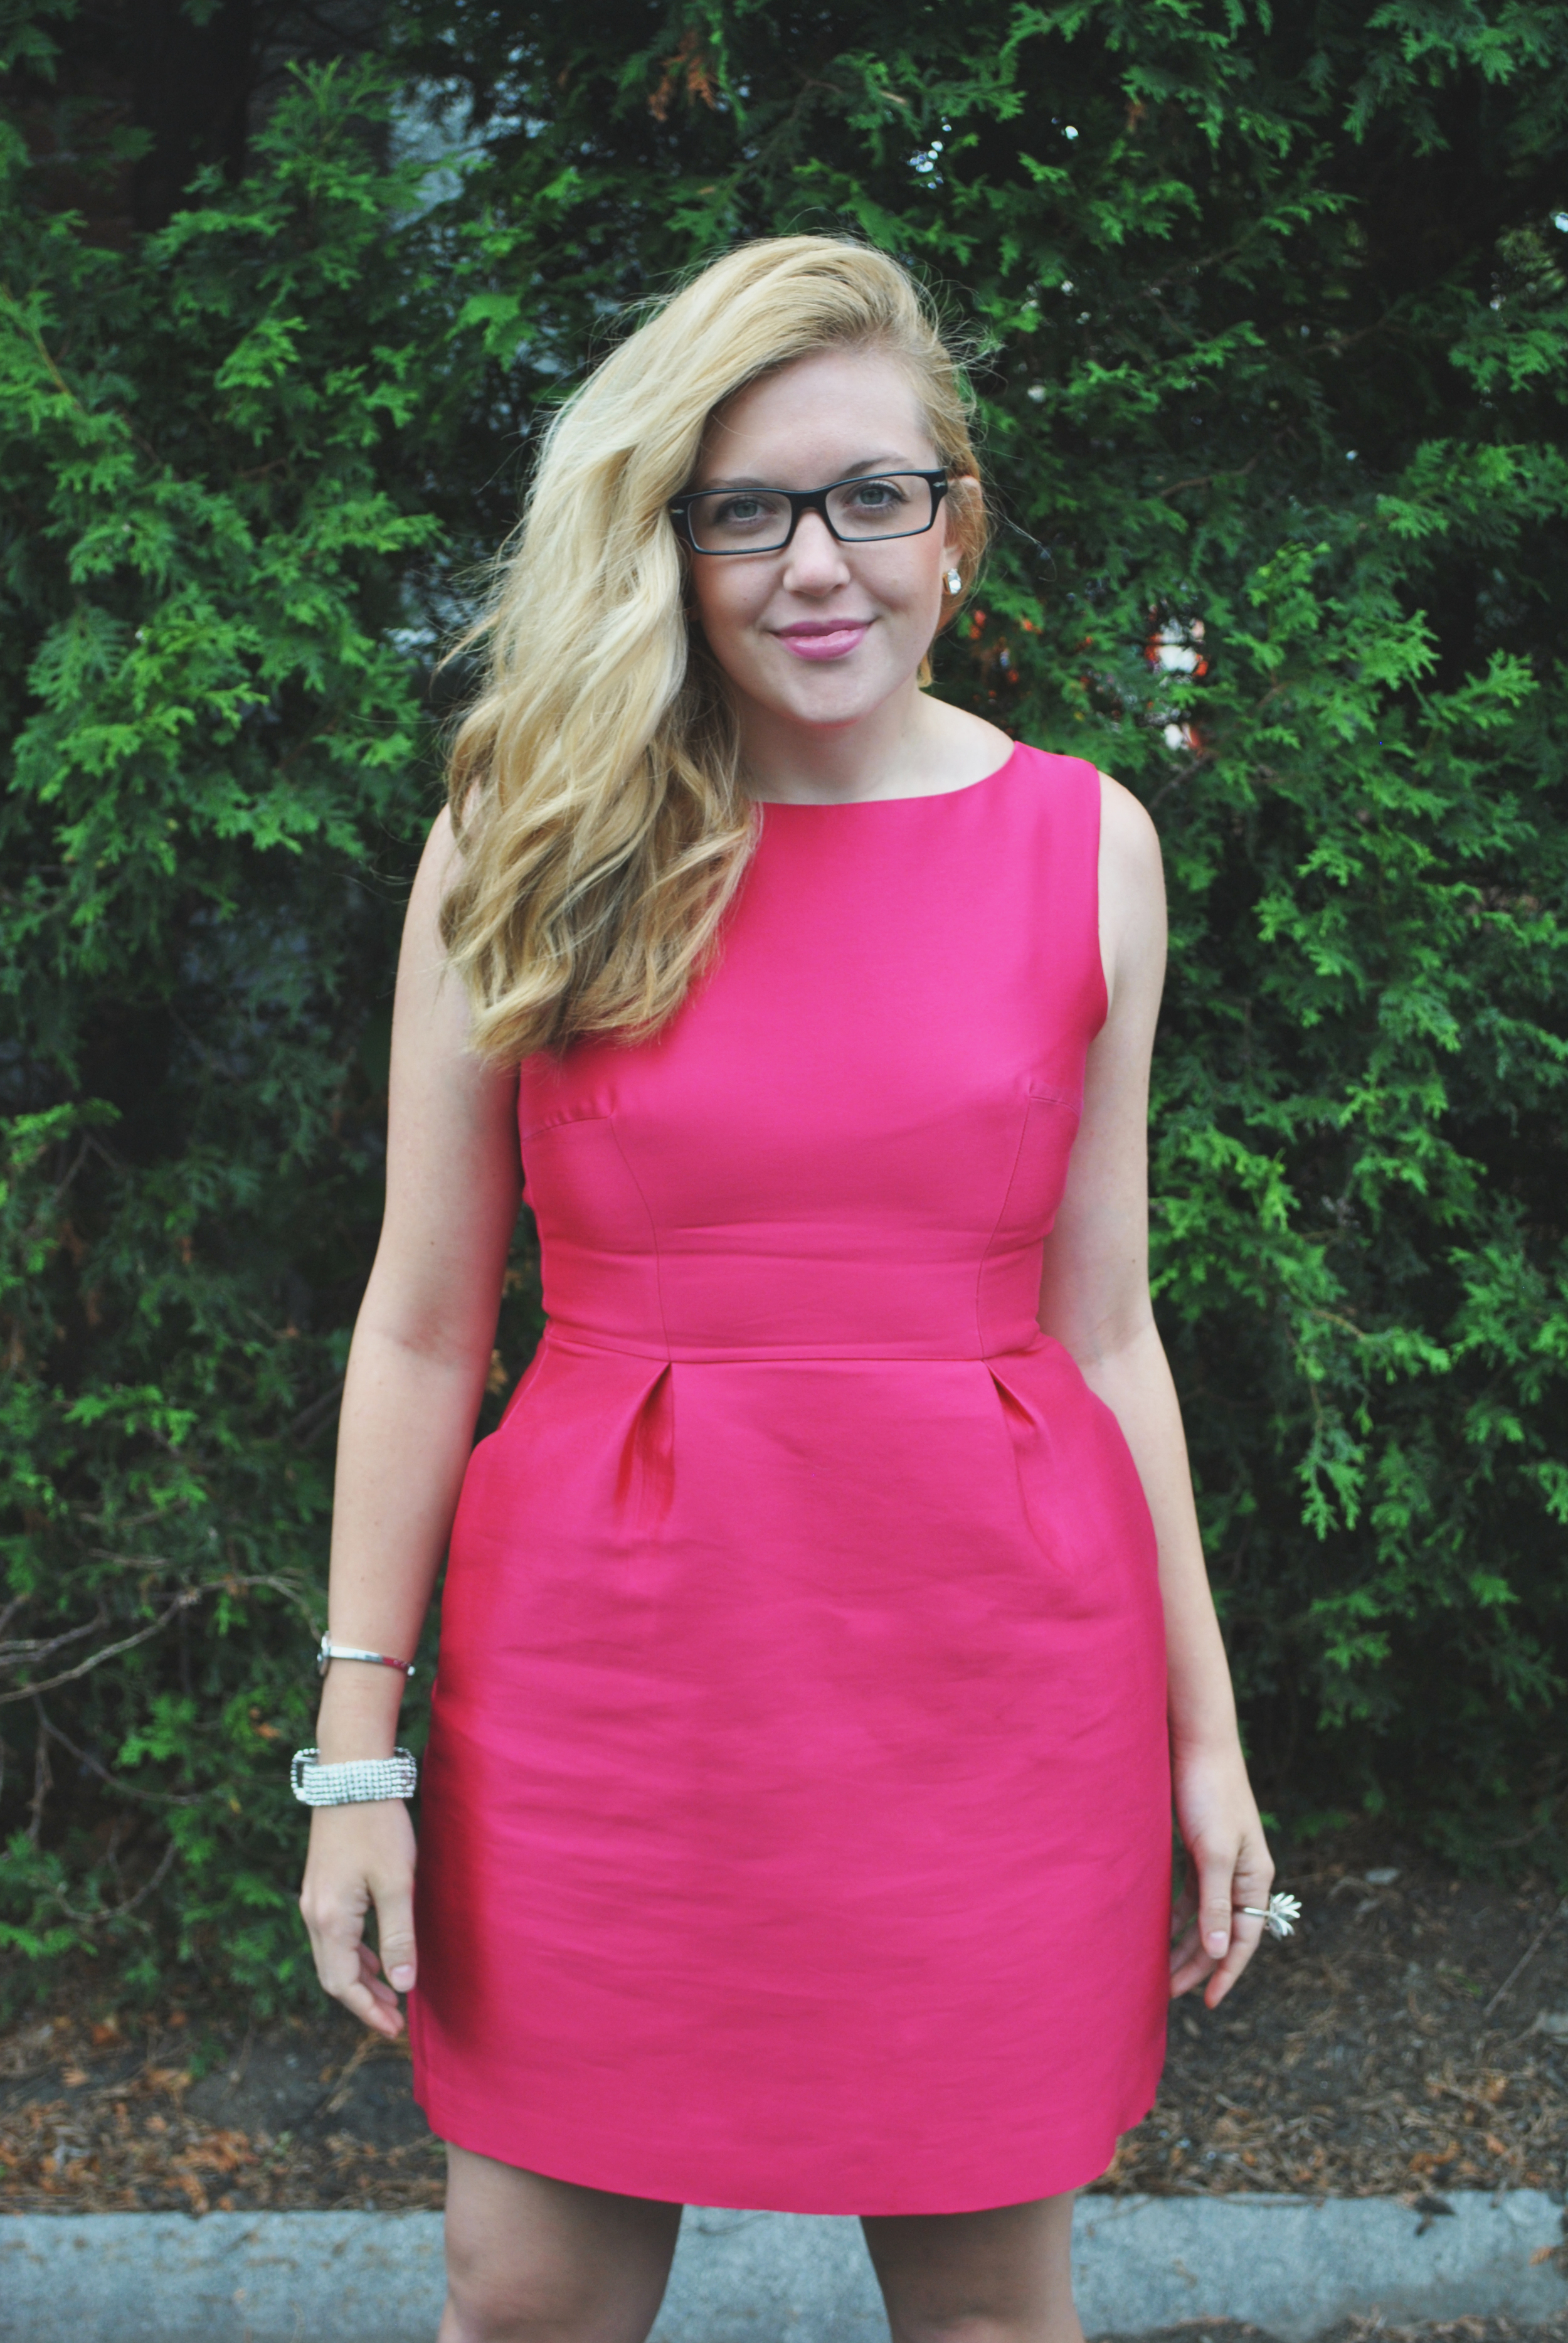 felicity smoak inspired fashion // pink dress // kate spade // trench coat // burberry // evening outfit | thoughtfulwish